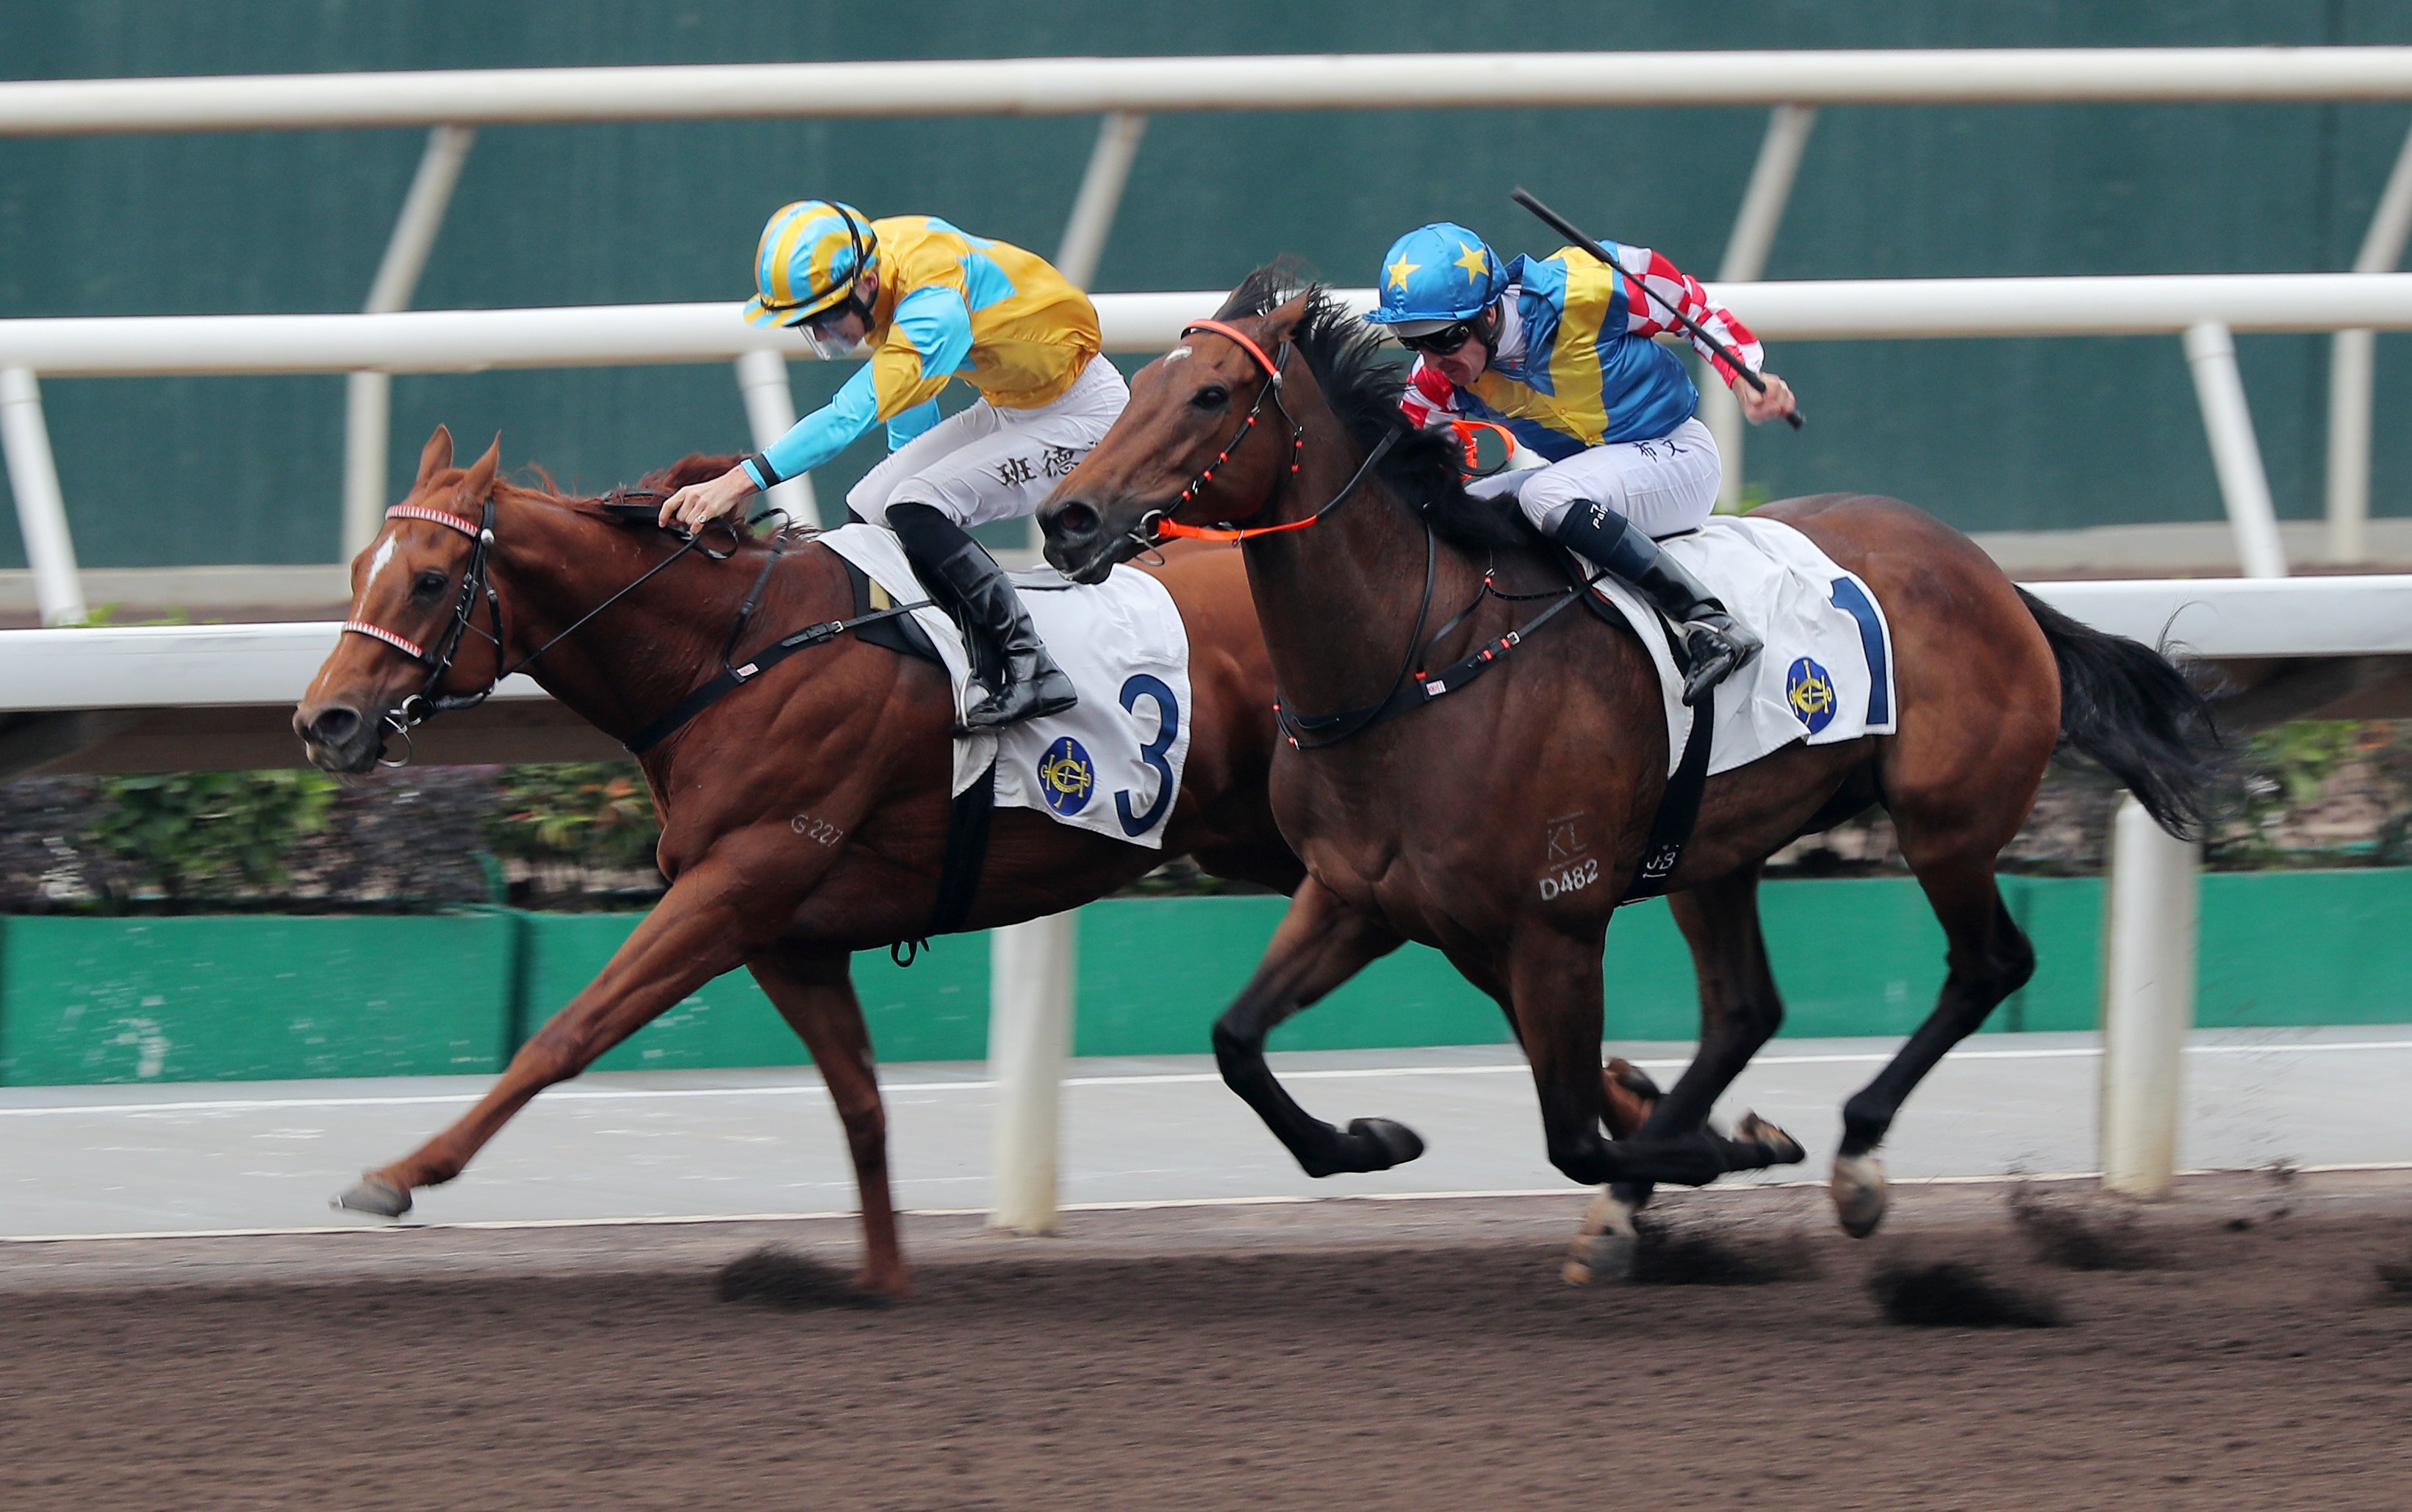 Mr Ascendency (inside) wins narrowly on the dirt at Sha Tin under Harry Bentley. Photos: Kenneth Chan